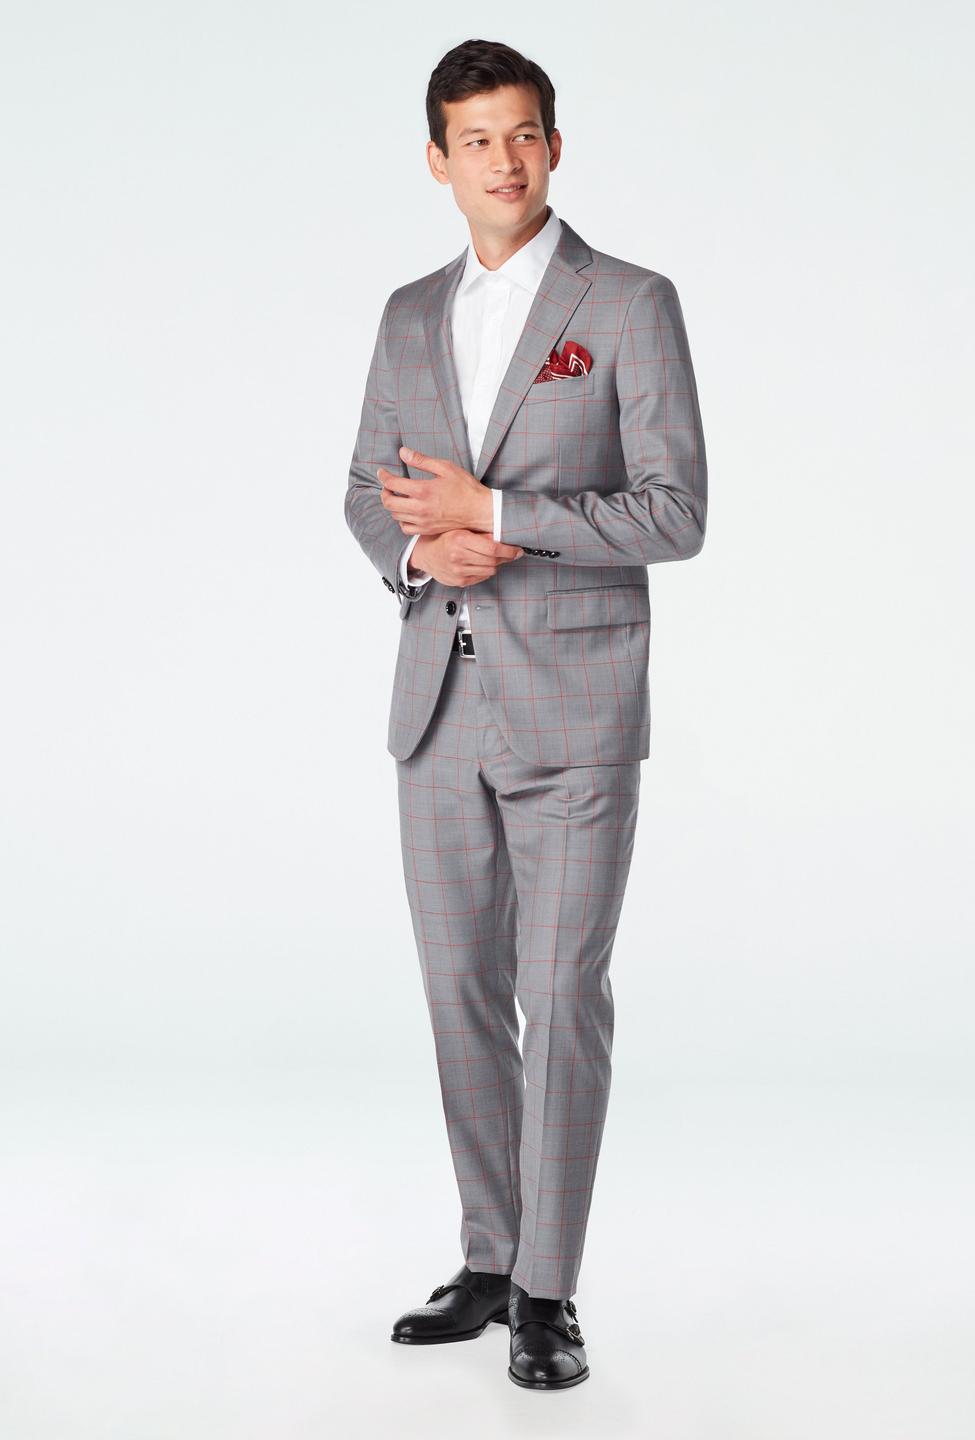 Gray suit - Malvern Checked Design from Seasonal Indochino Collection